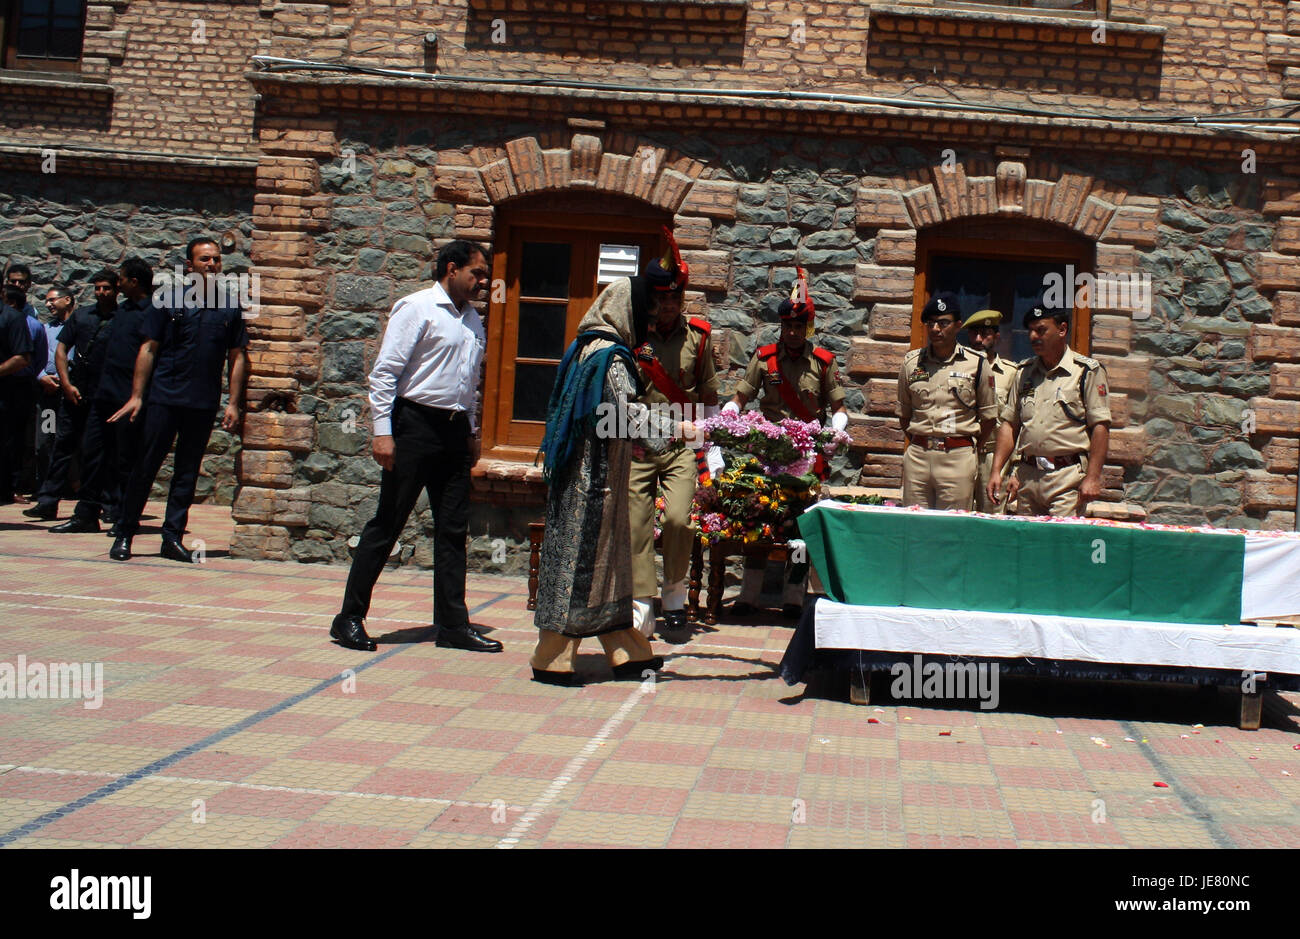 Srinagar, Kashmir. 23rd June, 2017. Jammu and Kashmir Chief Minister Mehbooba Mufti floral tributes at District police lines.during the Wreath laying ceremony of Deputy SP Mohammed Ayub Pandith of Security beaten to death by mob.He was allegedly clicking pictures of people while they were coming out of the mosque. They said people tried to catch Pandit who allegedly fired several shots from his pistol, injuring three persons.on the eve of Muslims across Kashmir are observing Shab-e-Qadr (the night).outside the Grand mosque in down town area of srinagar. © Sofi Suhail/Alamy Live News Stock Photo